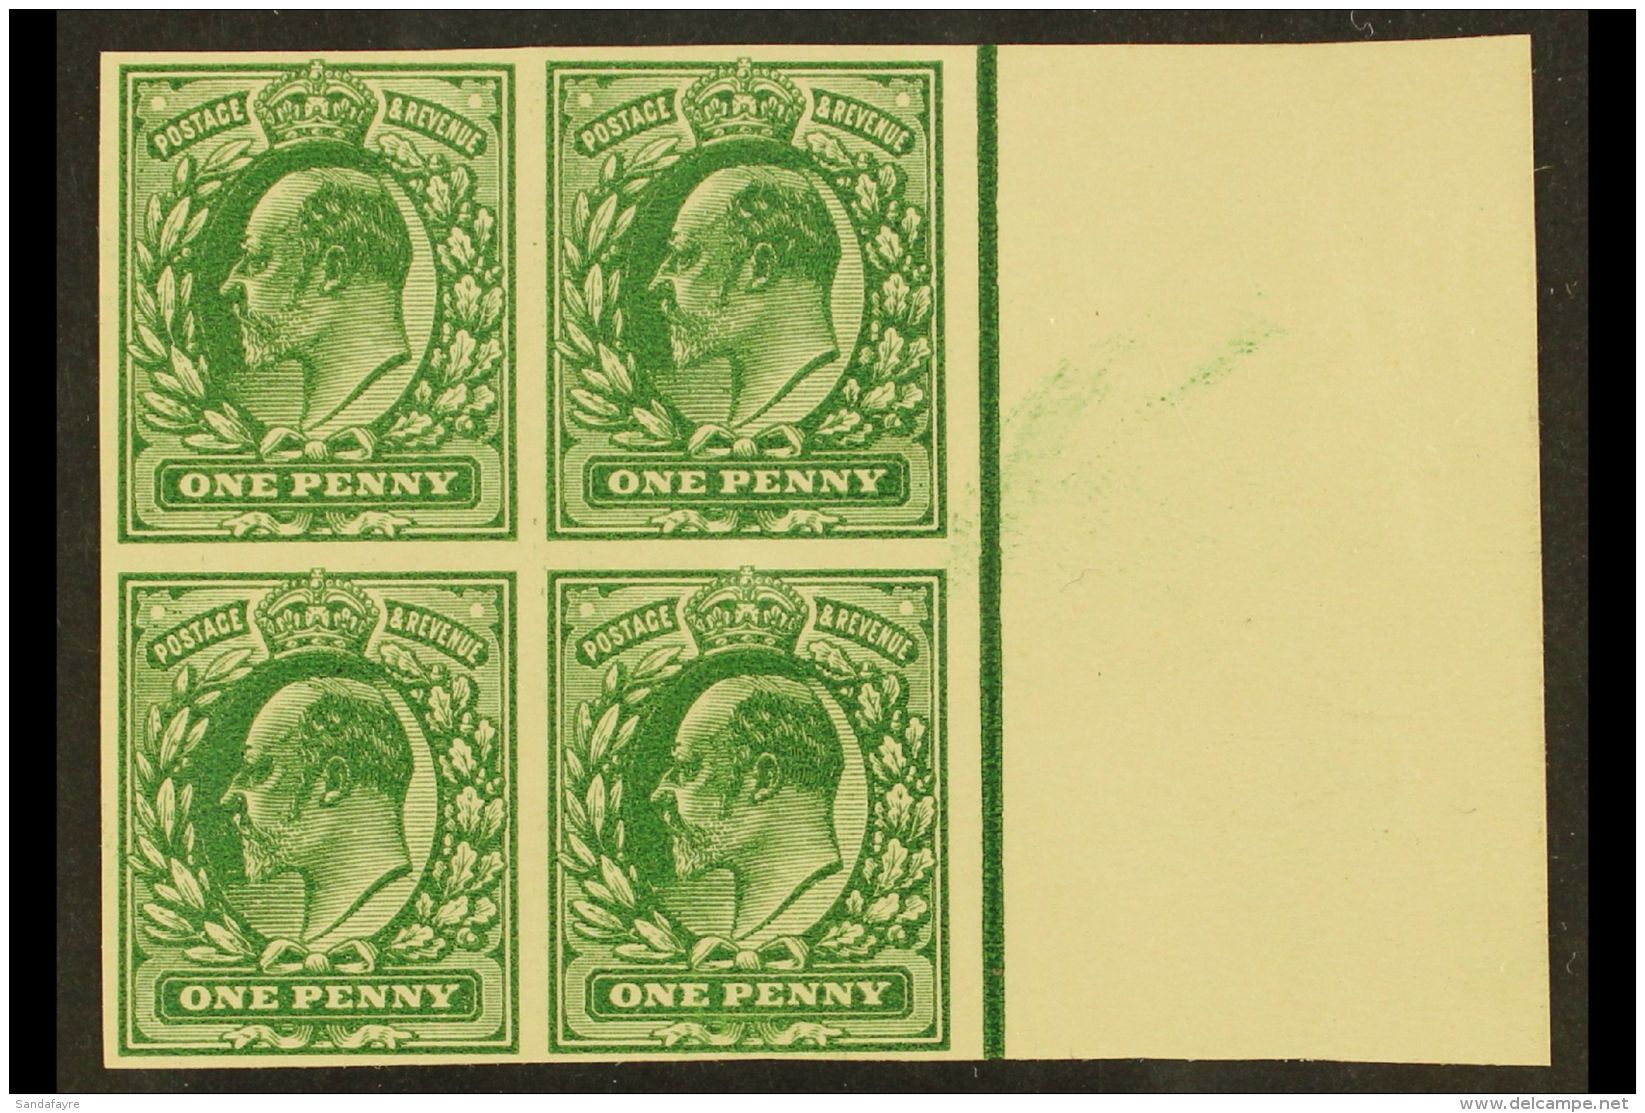 1902-10 1d IMPERF PLATE PROOF (no Watermark) In Green, A Very Fine Right Marginal BLOCK OF FOUR. For More Images,... - Unclassified